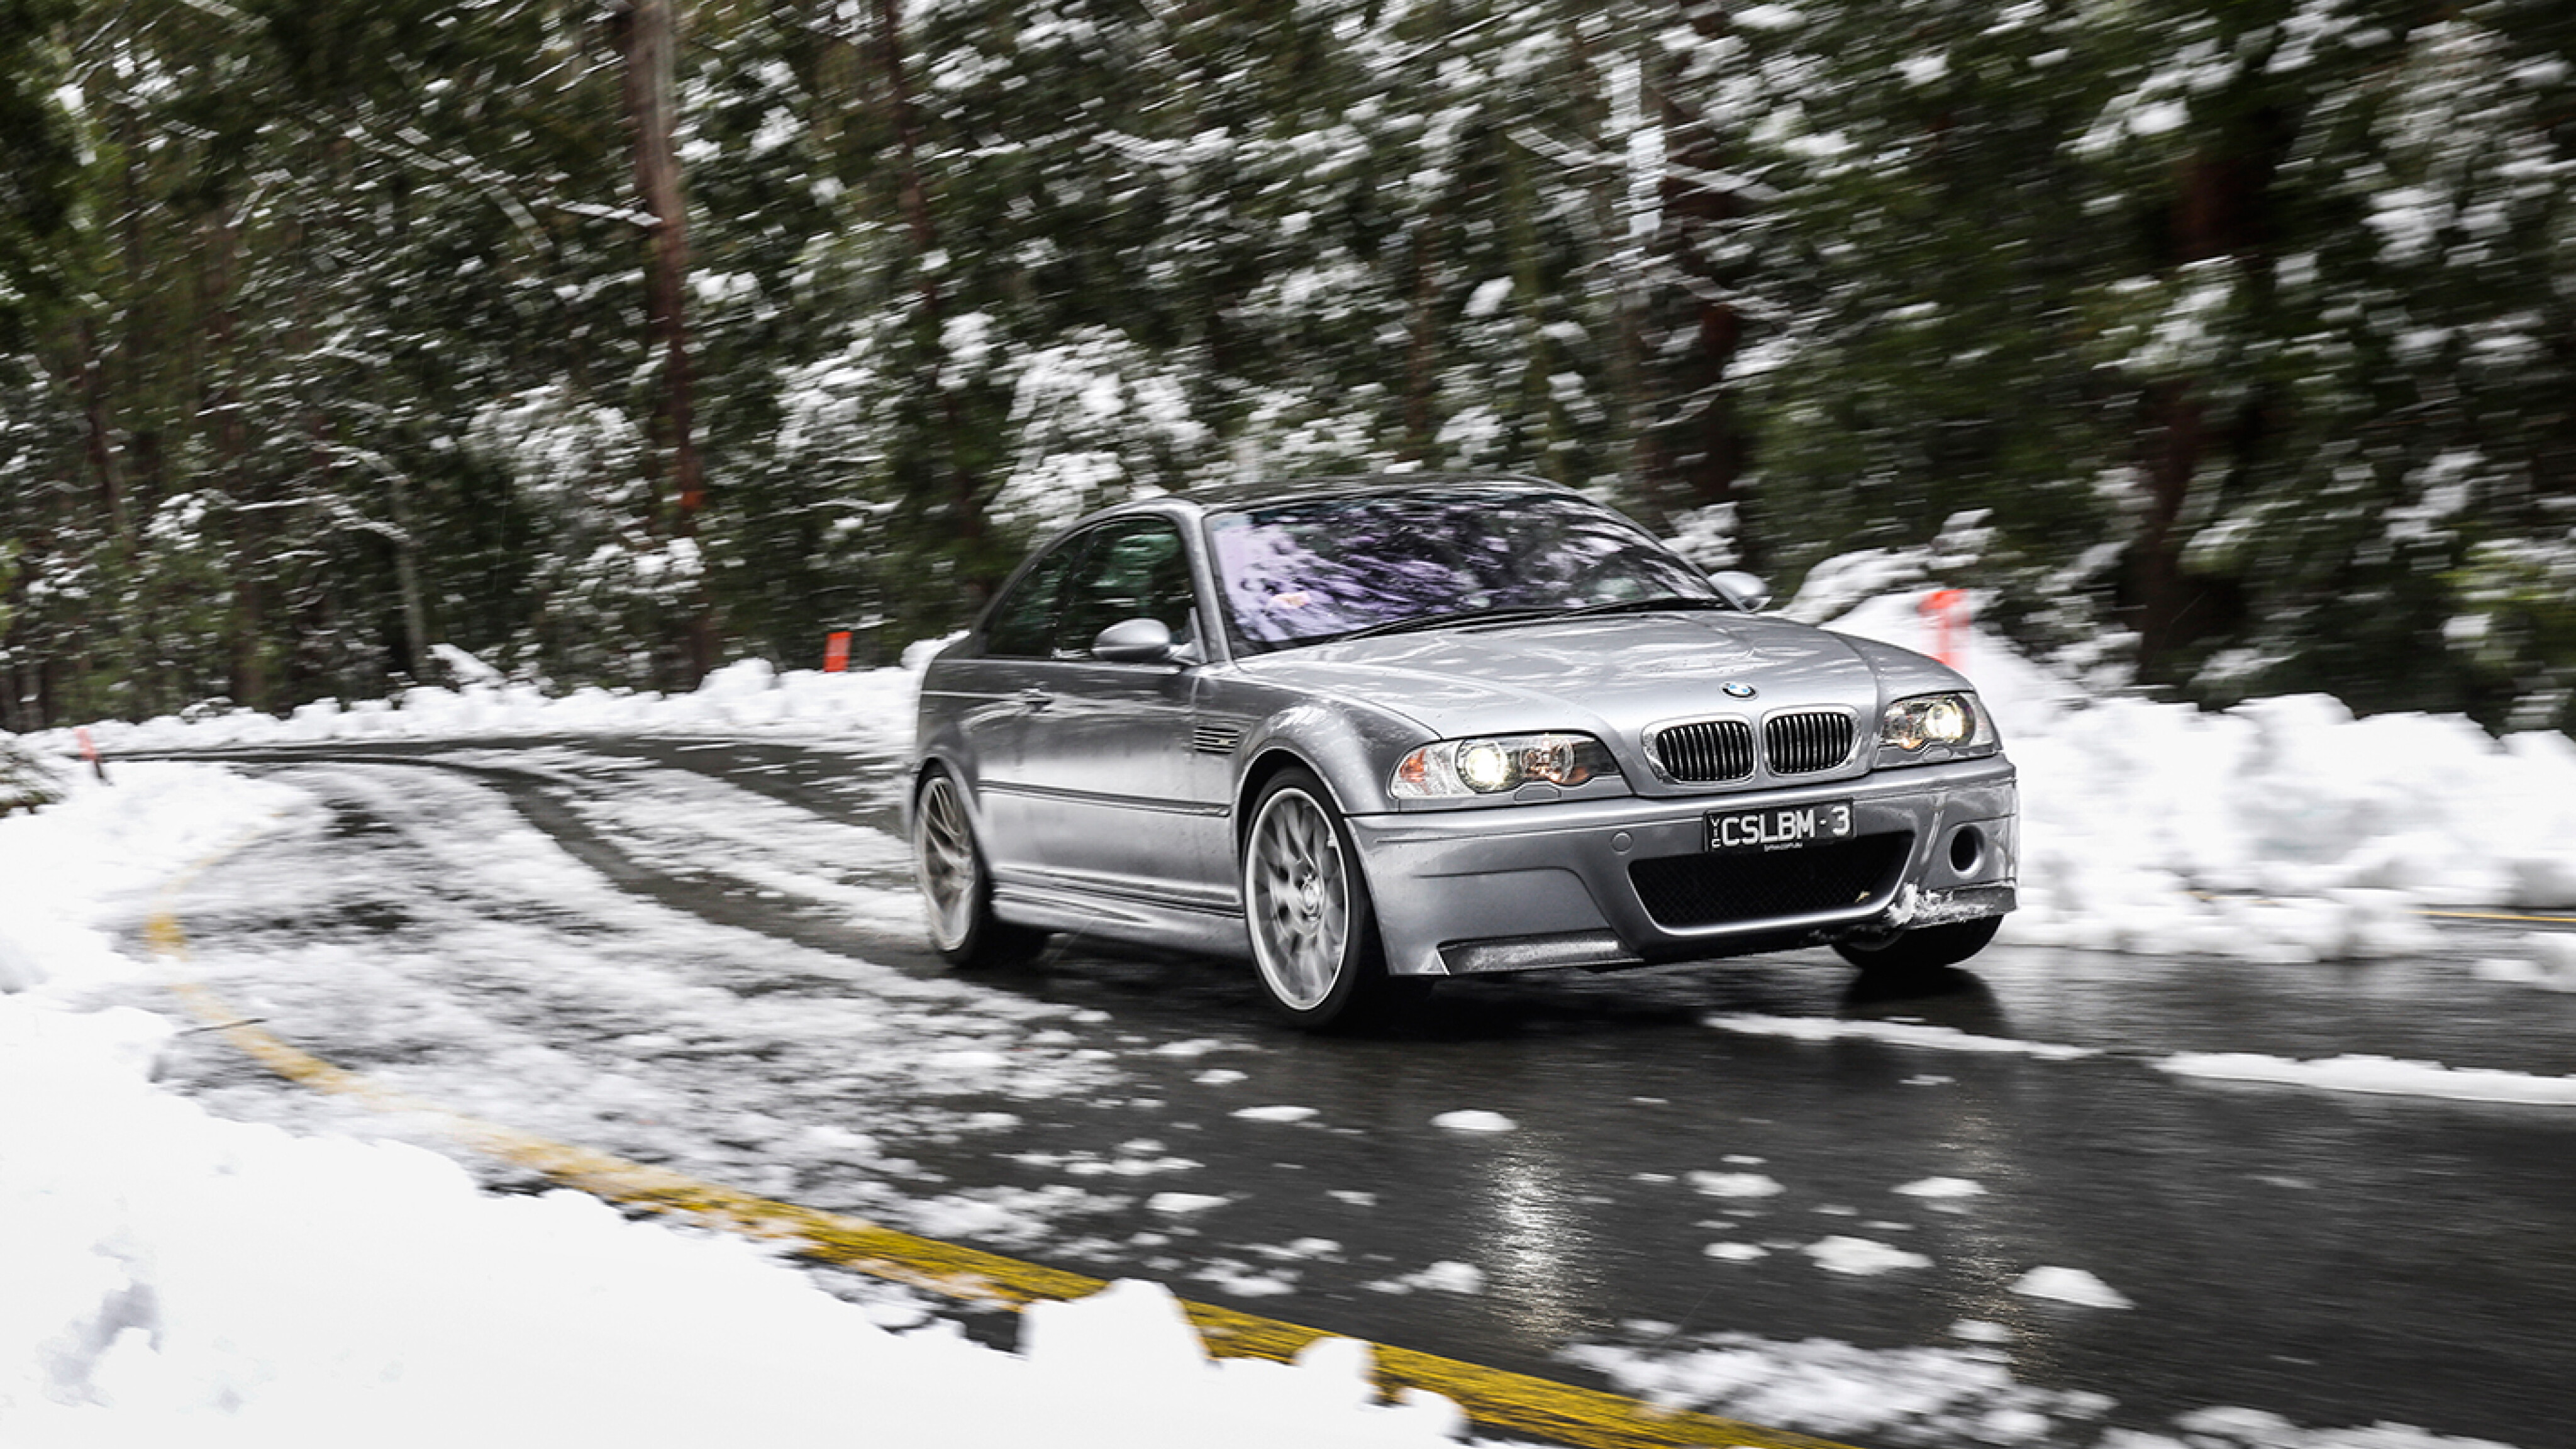 TEST DRIVE: BMW E46 3 Series - Revisited 20 Years Later